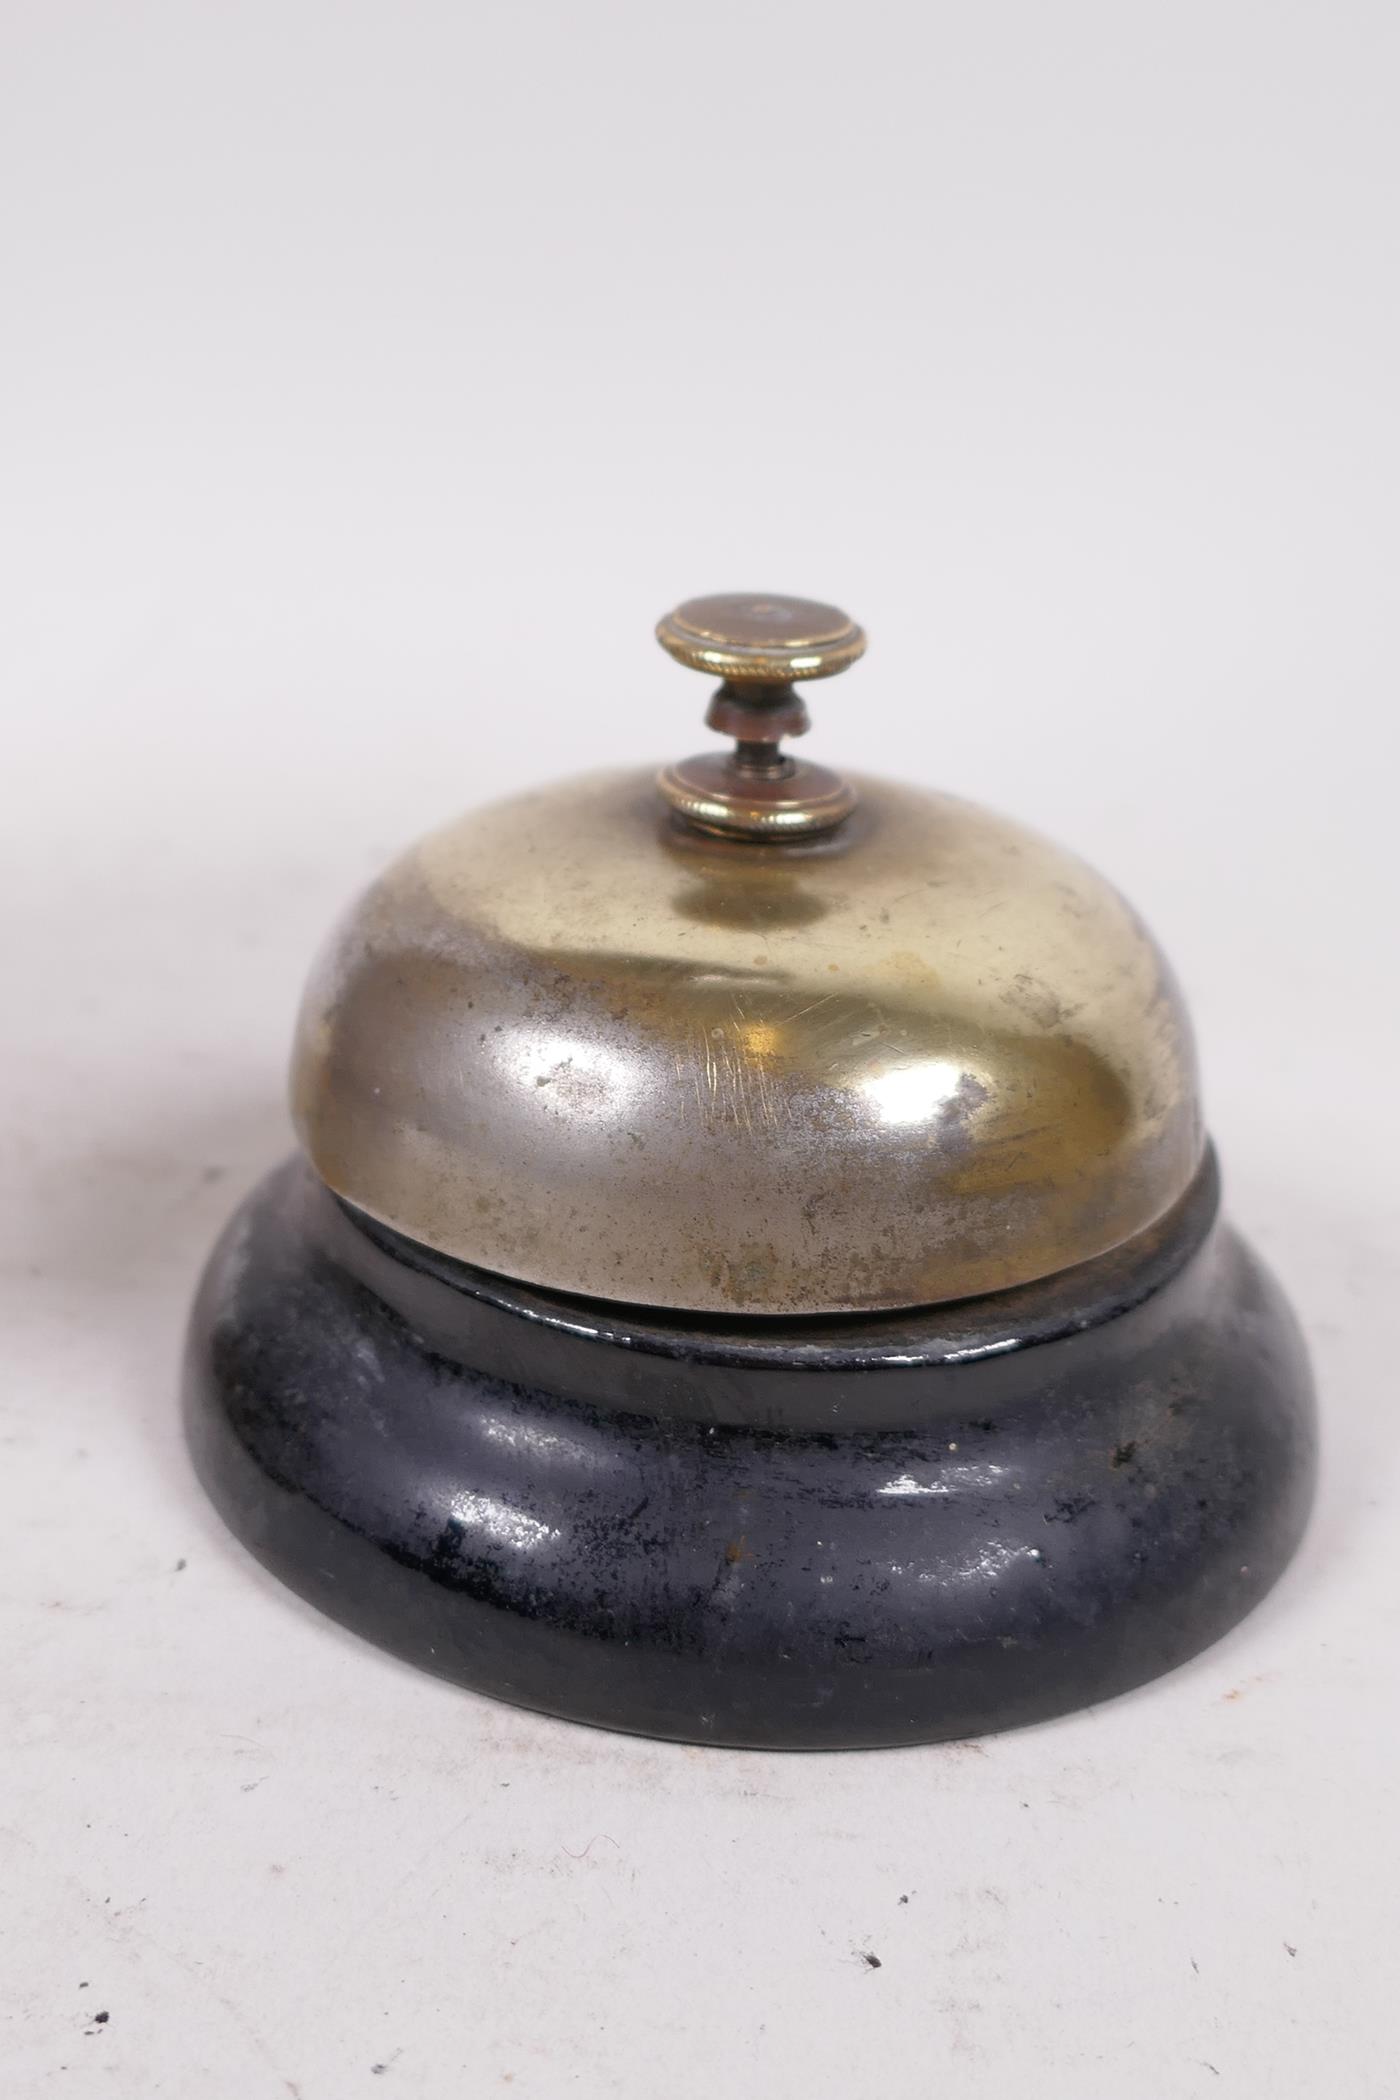 An antique French wooden mortar and pestle, mortar 4" high, and a reception desk bell - Image 3 of 3